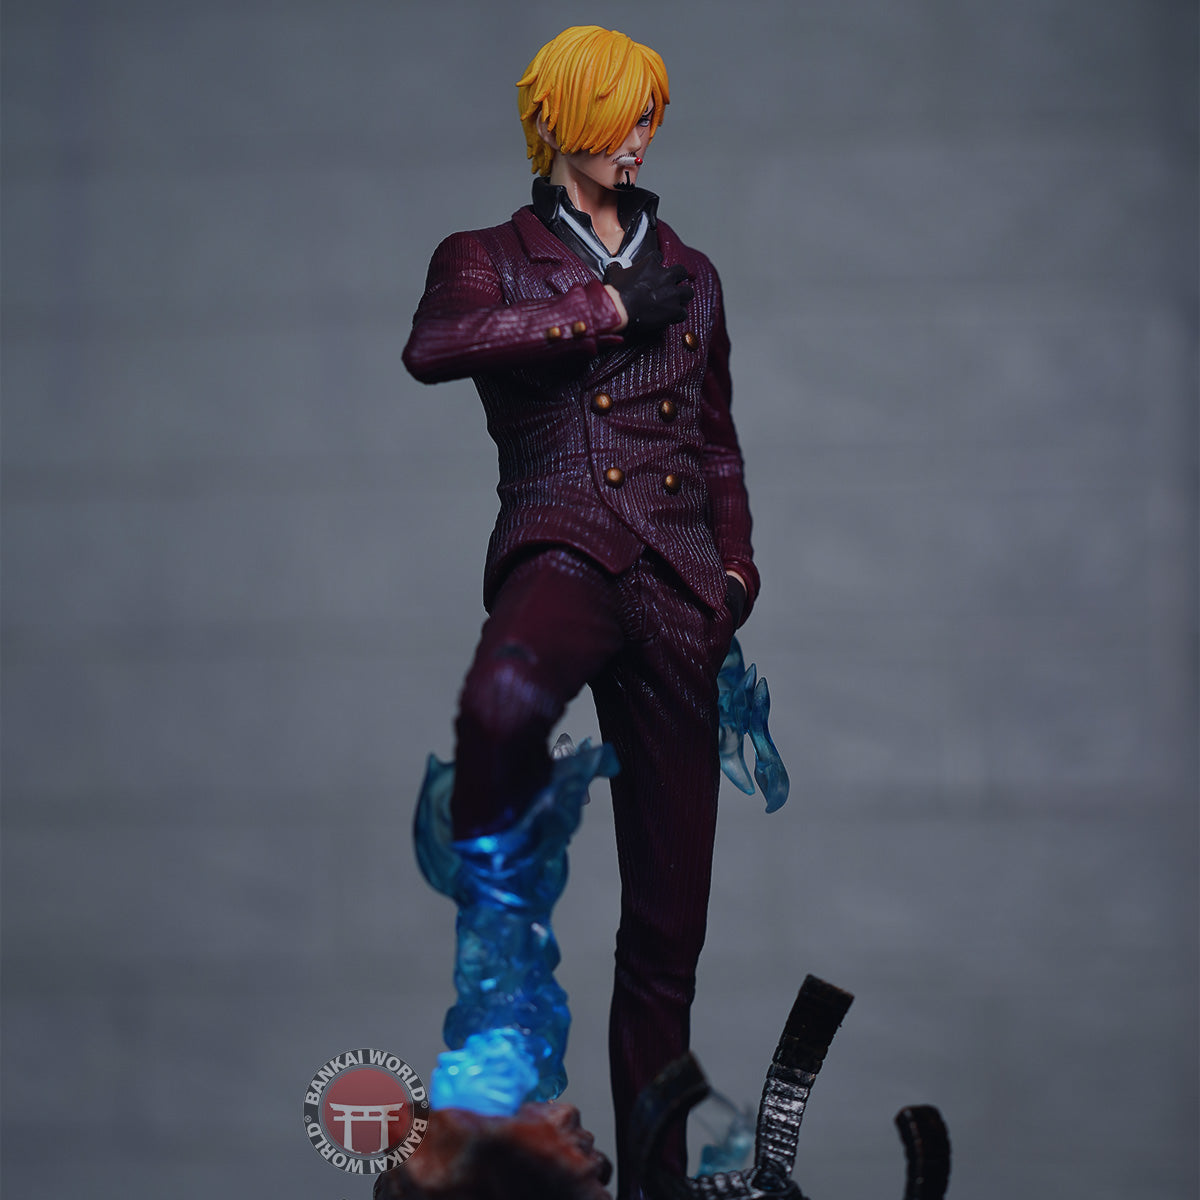 Sanji Fighting Pose With Blue Flames Lighting Action Figure